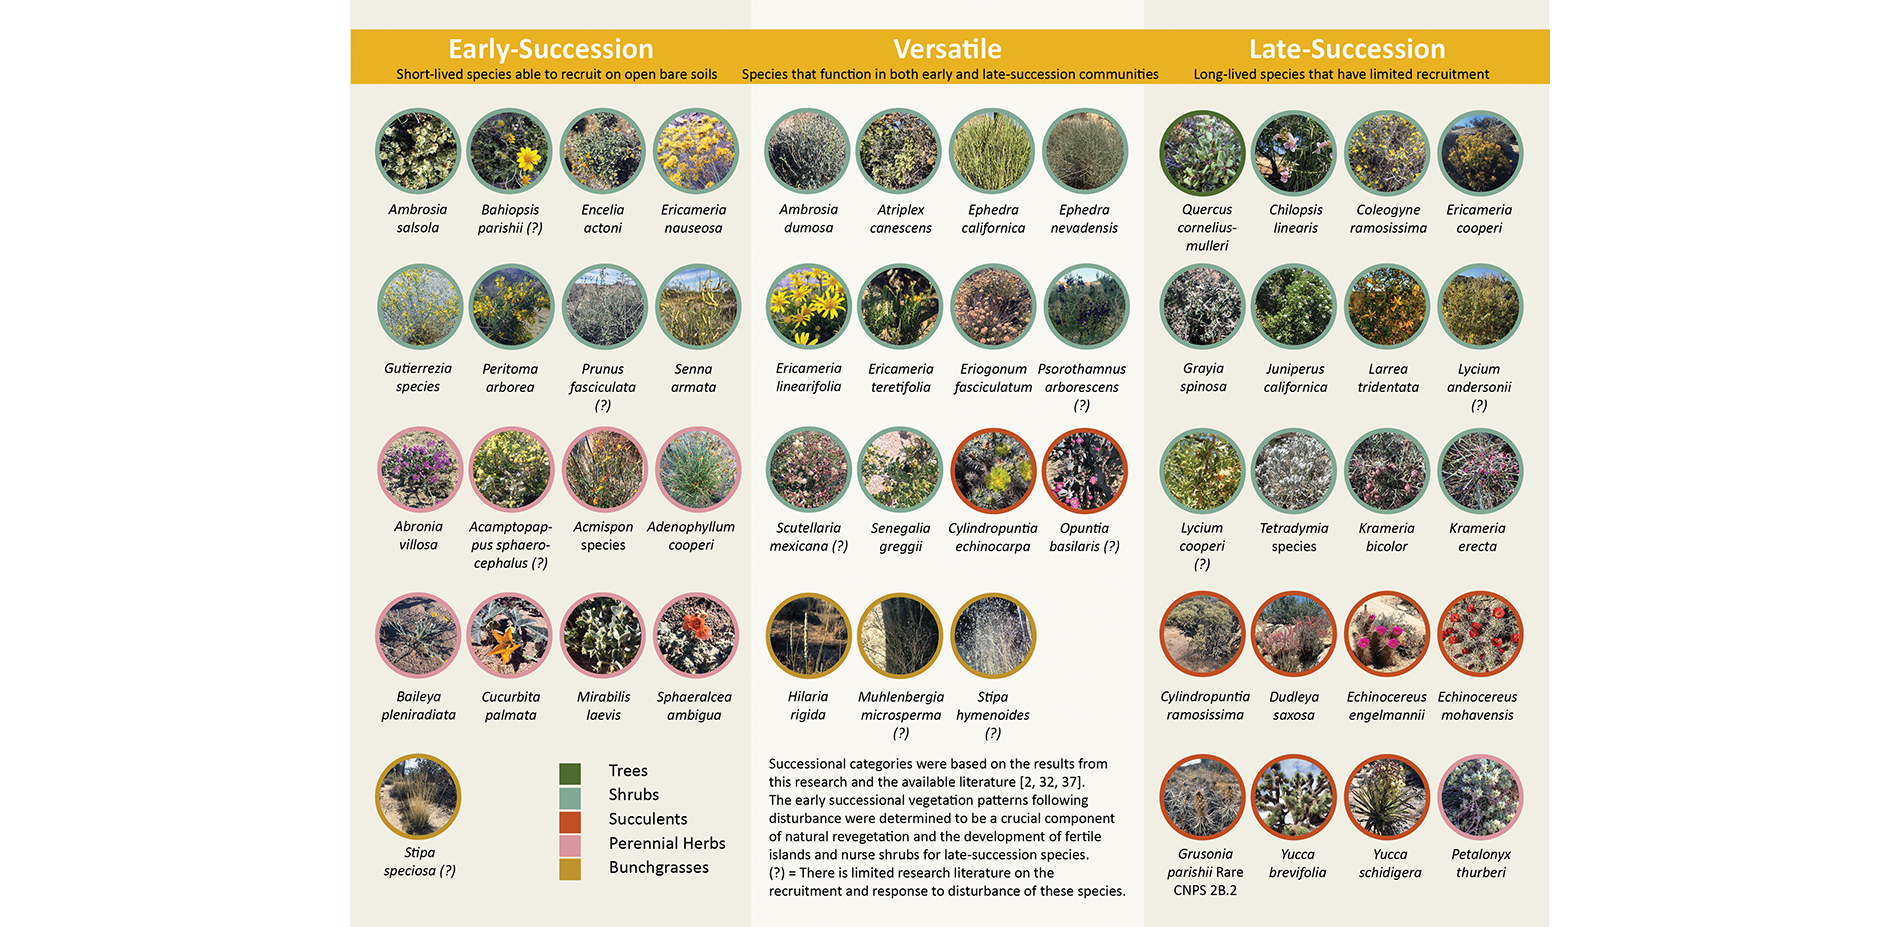 Vegetation species were grouped into three categories based on this research and available literature to describe their response to disturbance and ro…